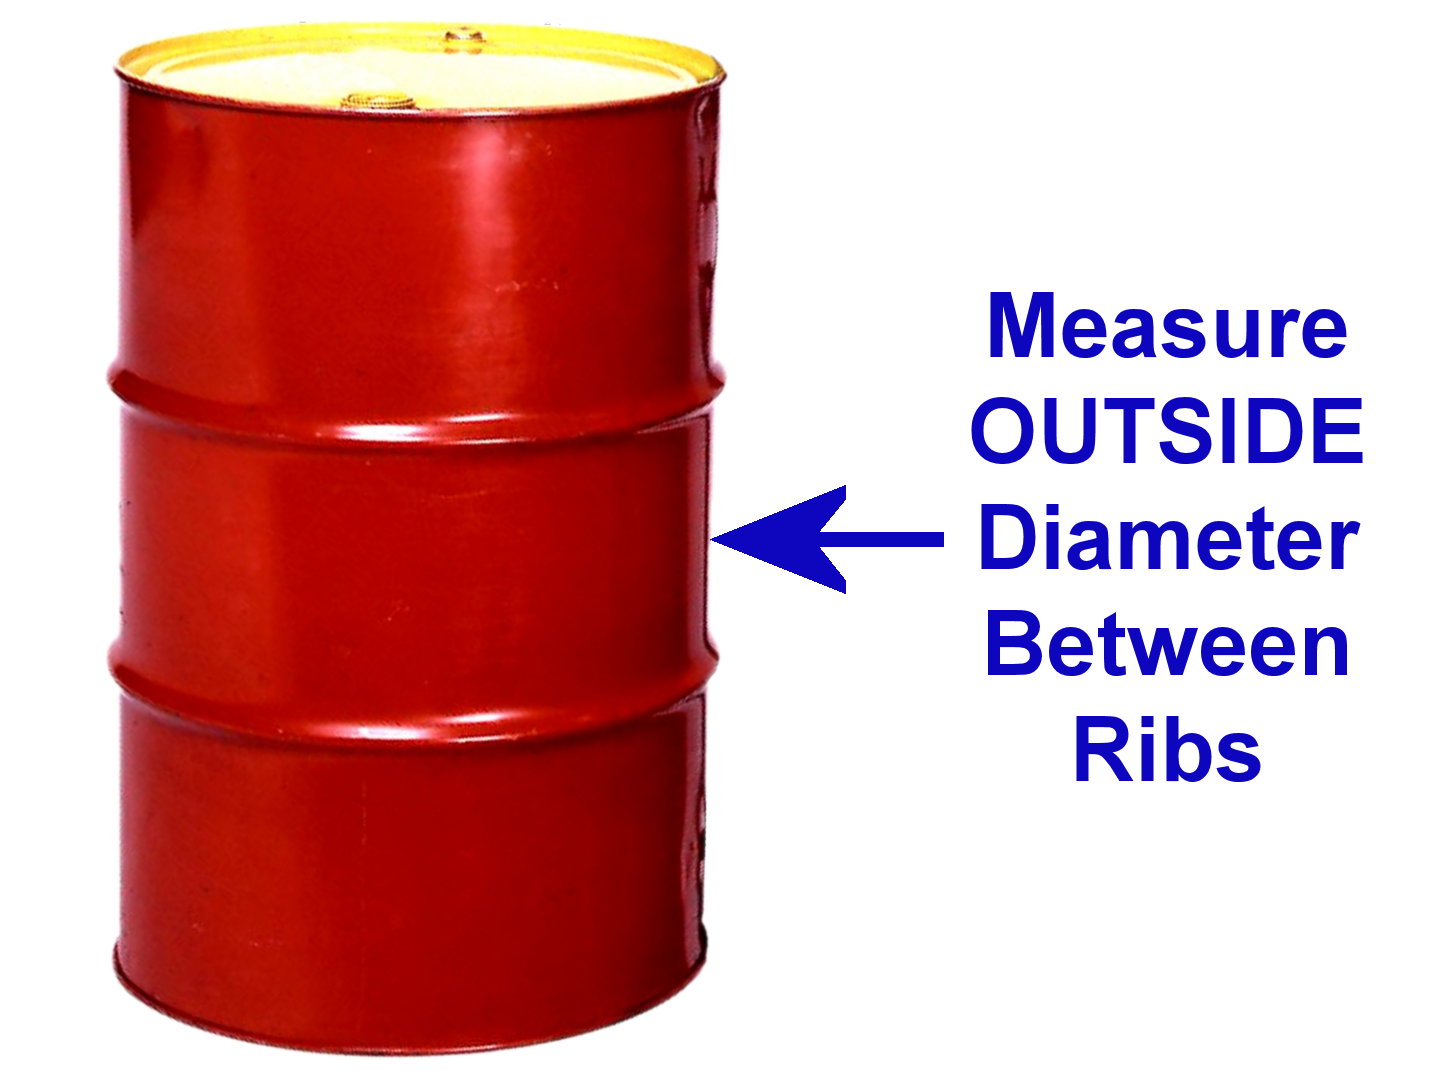 Measure drum for correct size Diameter Adapter